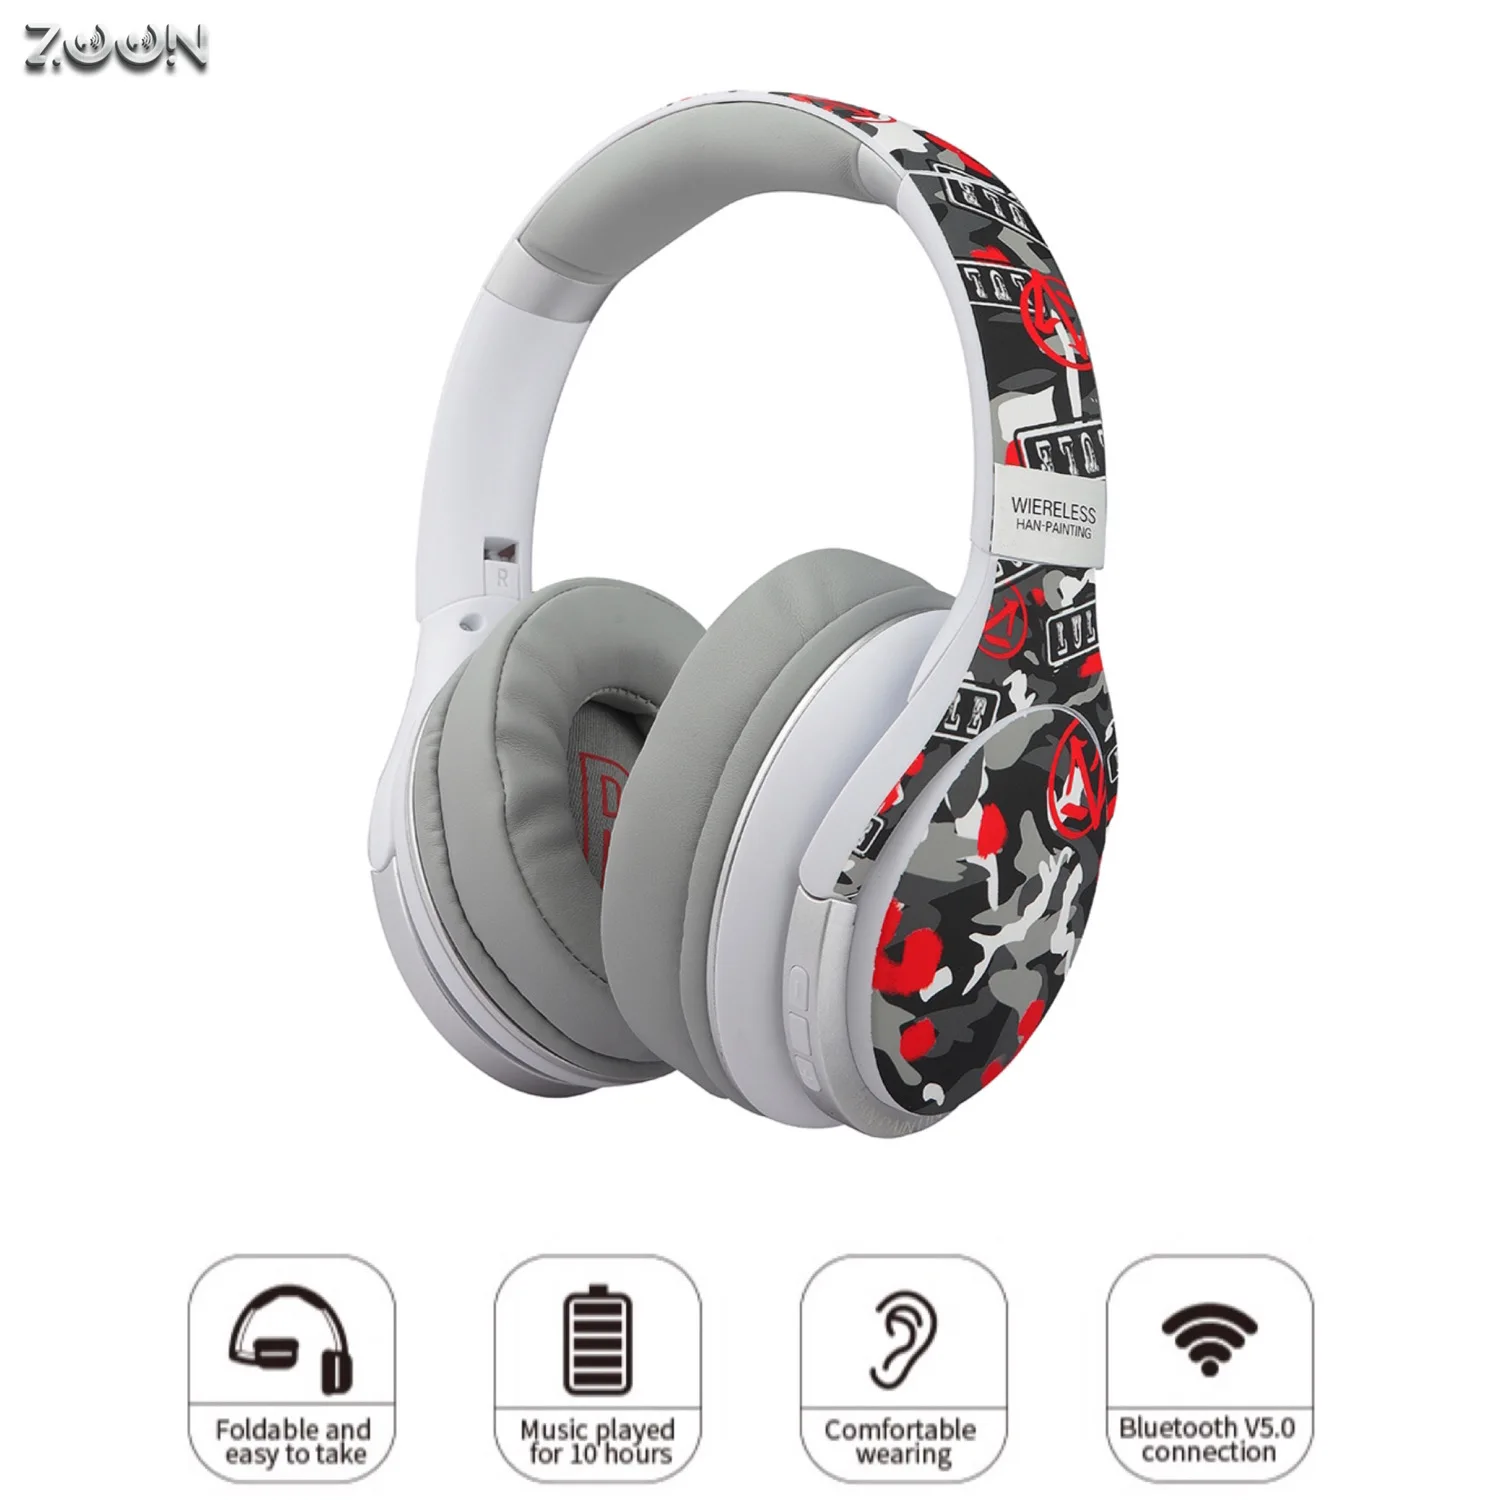 

Zoon Gamer Wireless Headset High Quality Sound Surround Gaming Headsets Headphones Earbuds With Microphone For Phones Tablets